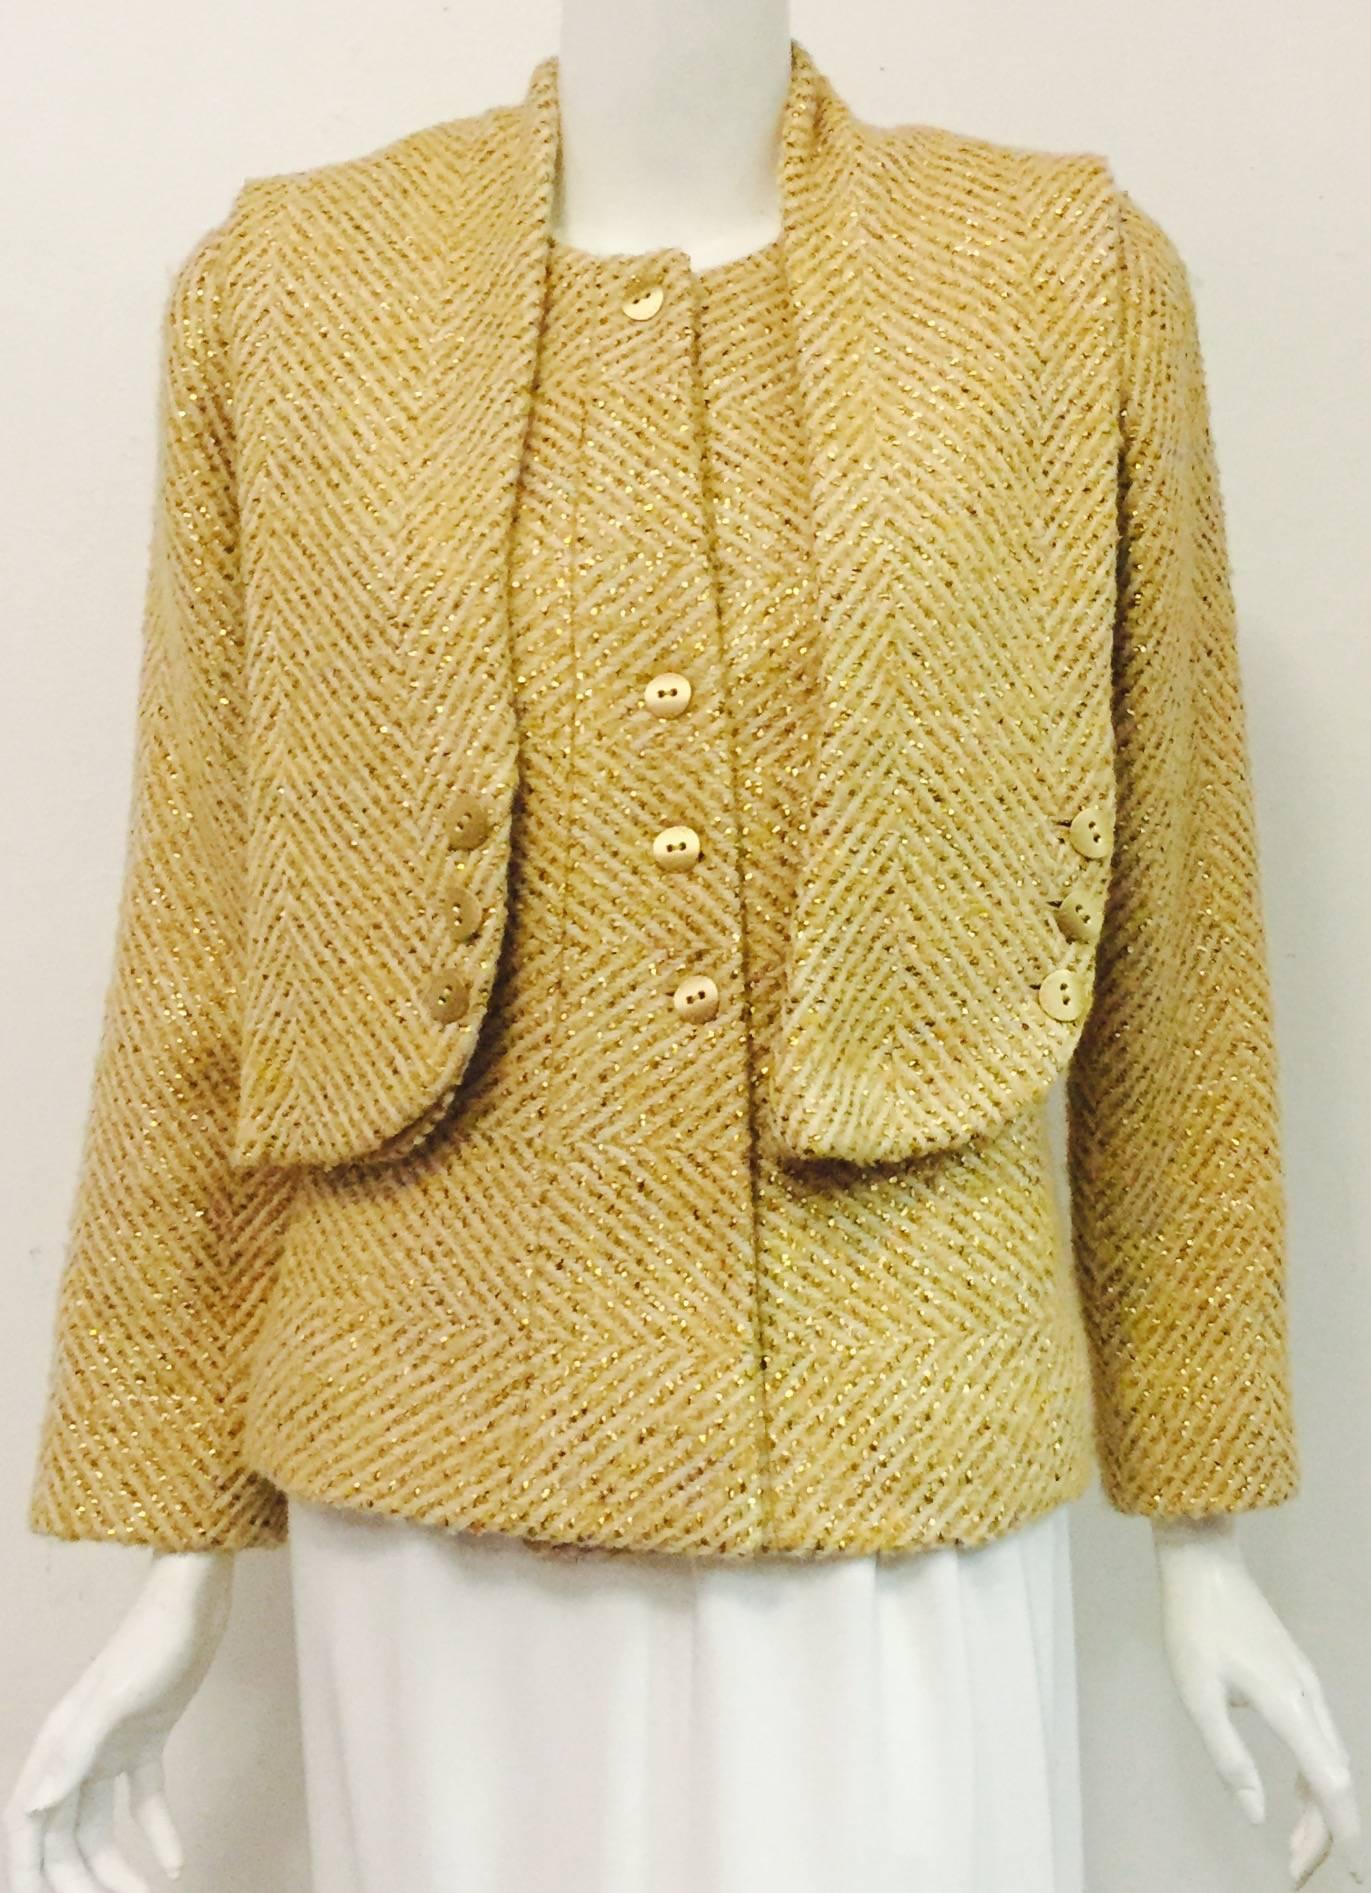 Chanel wool and silk blend cream color fabric with gold tone ribbons woven diagonally is elegantly designed.  This jacket makes a statement on its own and with the scarf it's sensational!  The jacket has a round neckline with 4 gold tone signature